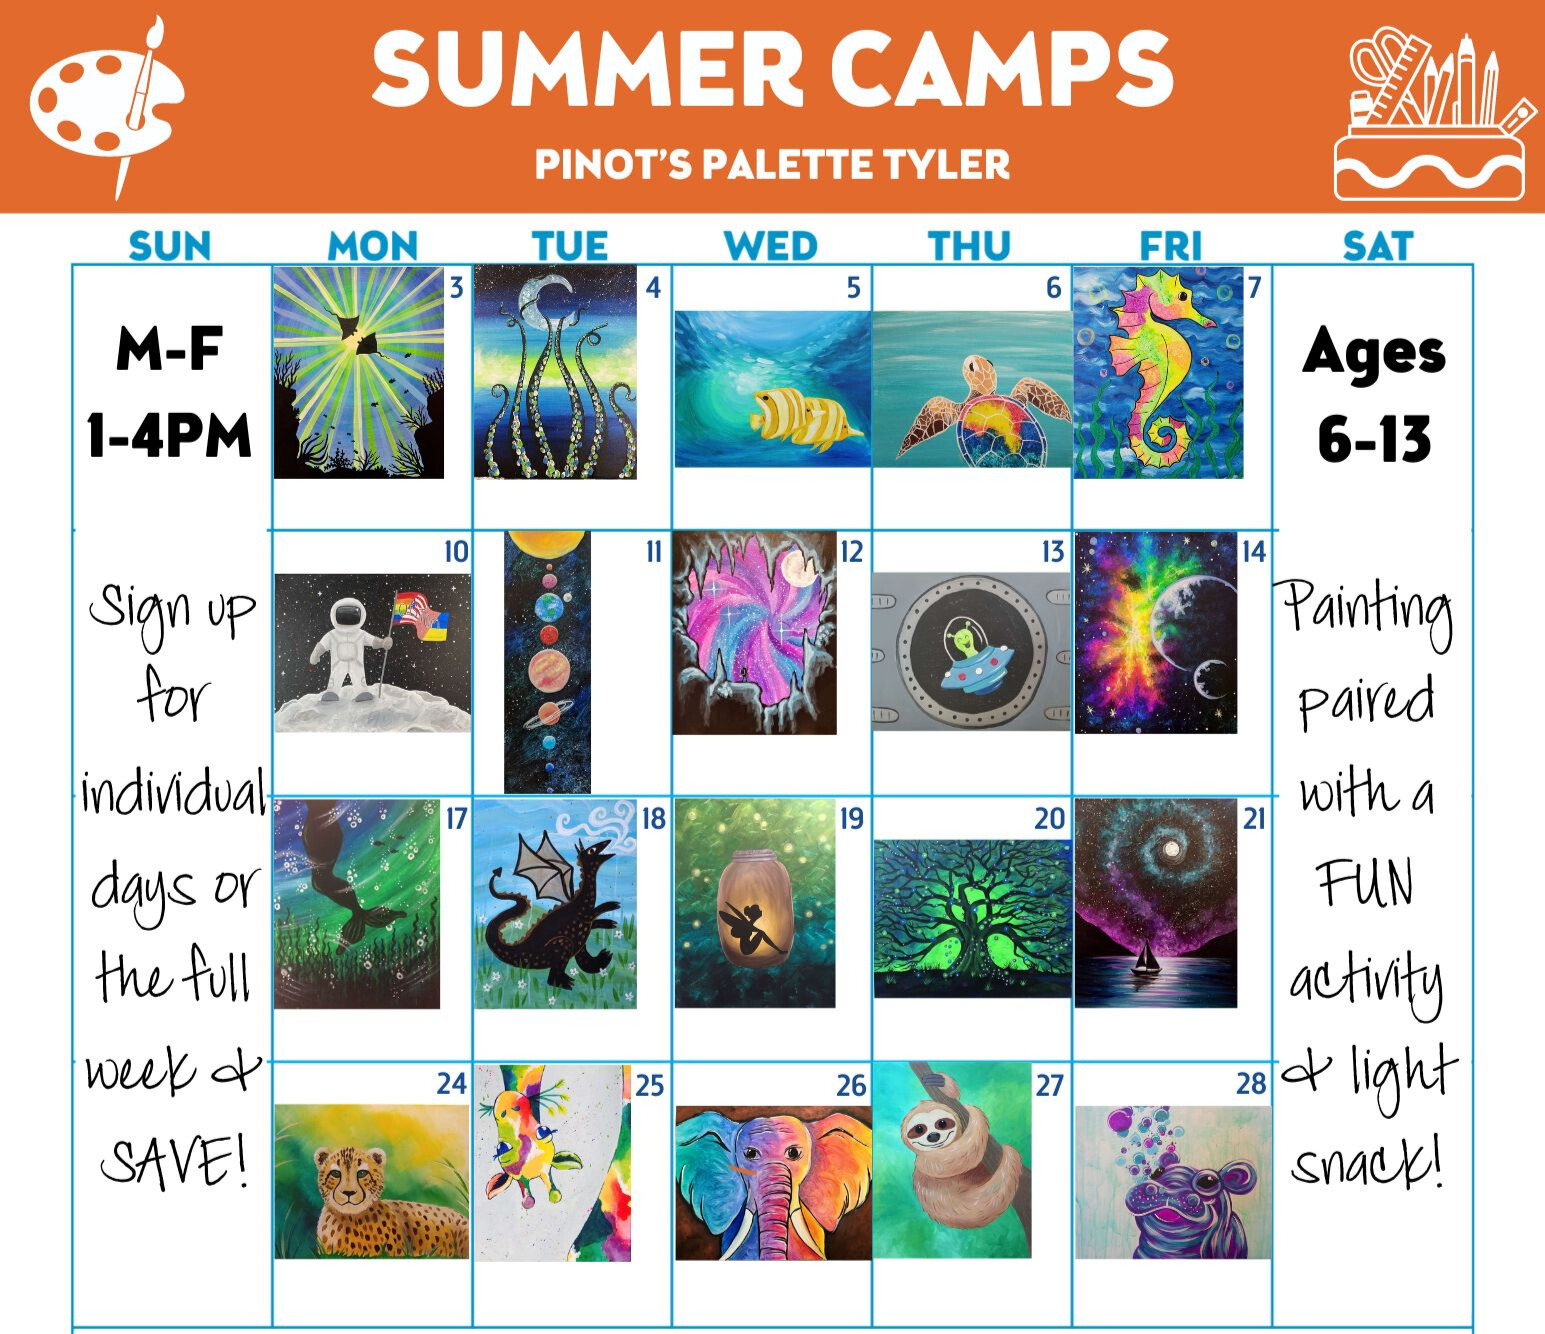 View All Upcoming Summer Camps! Sign up for individual days or the full week and SAVE!